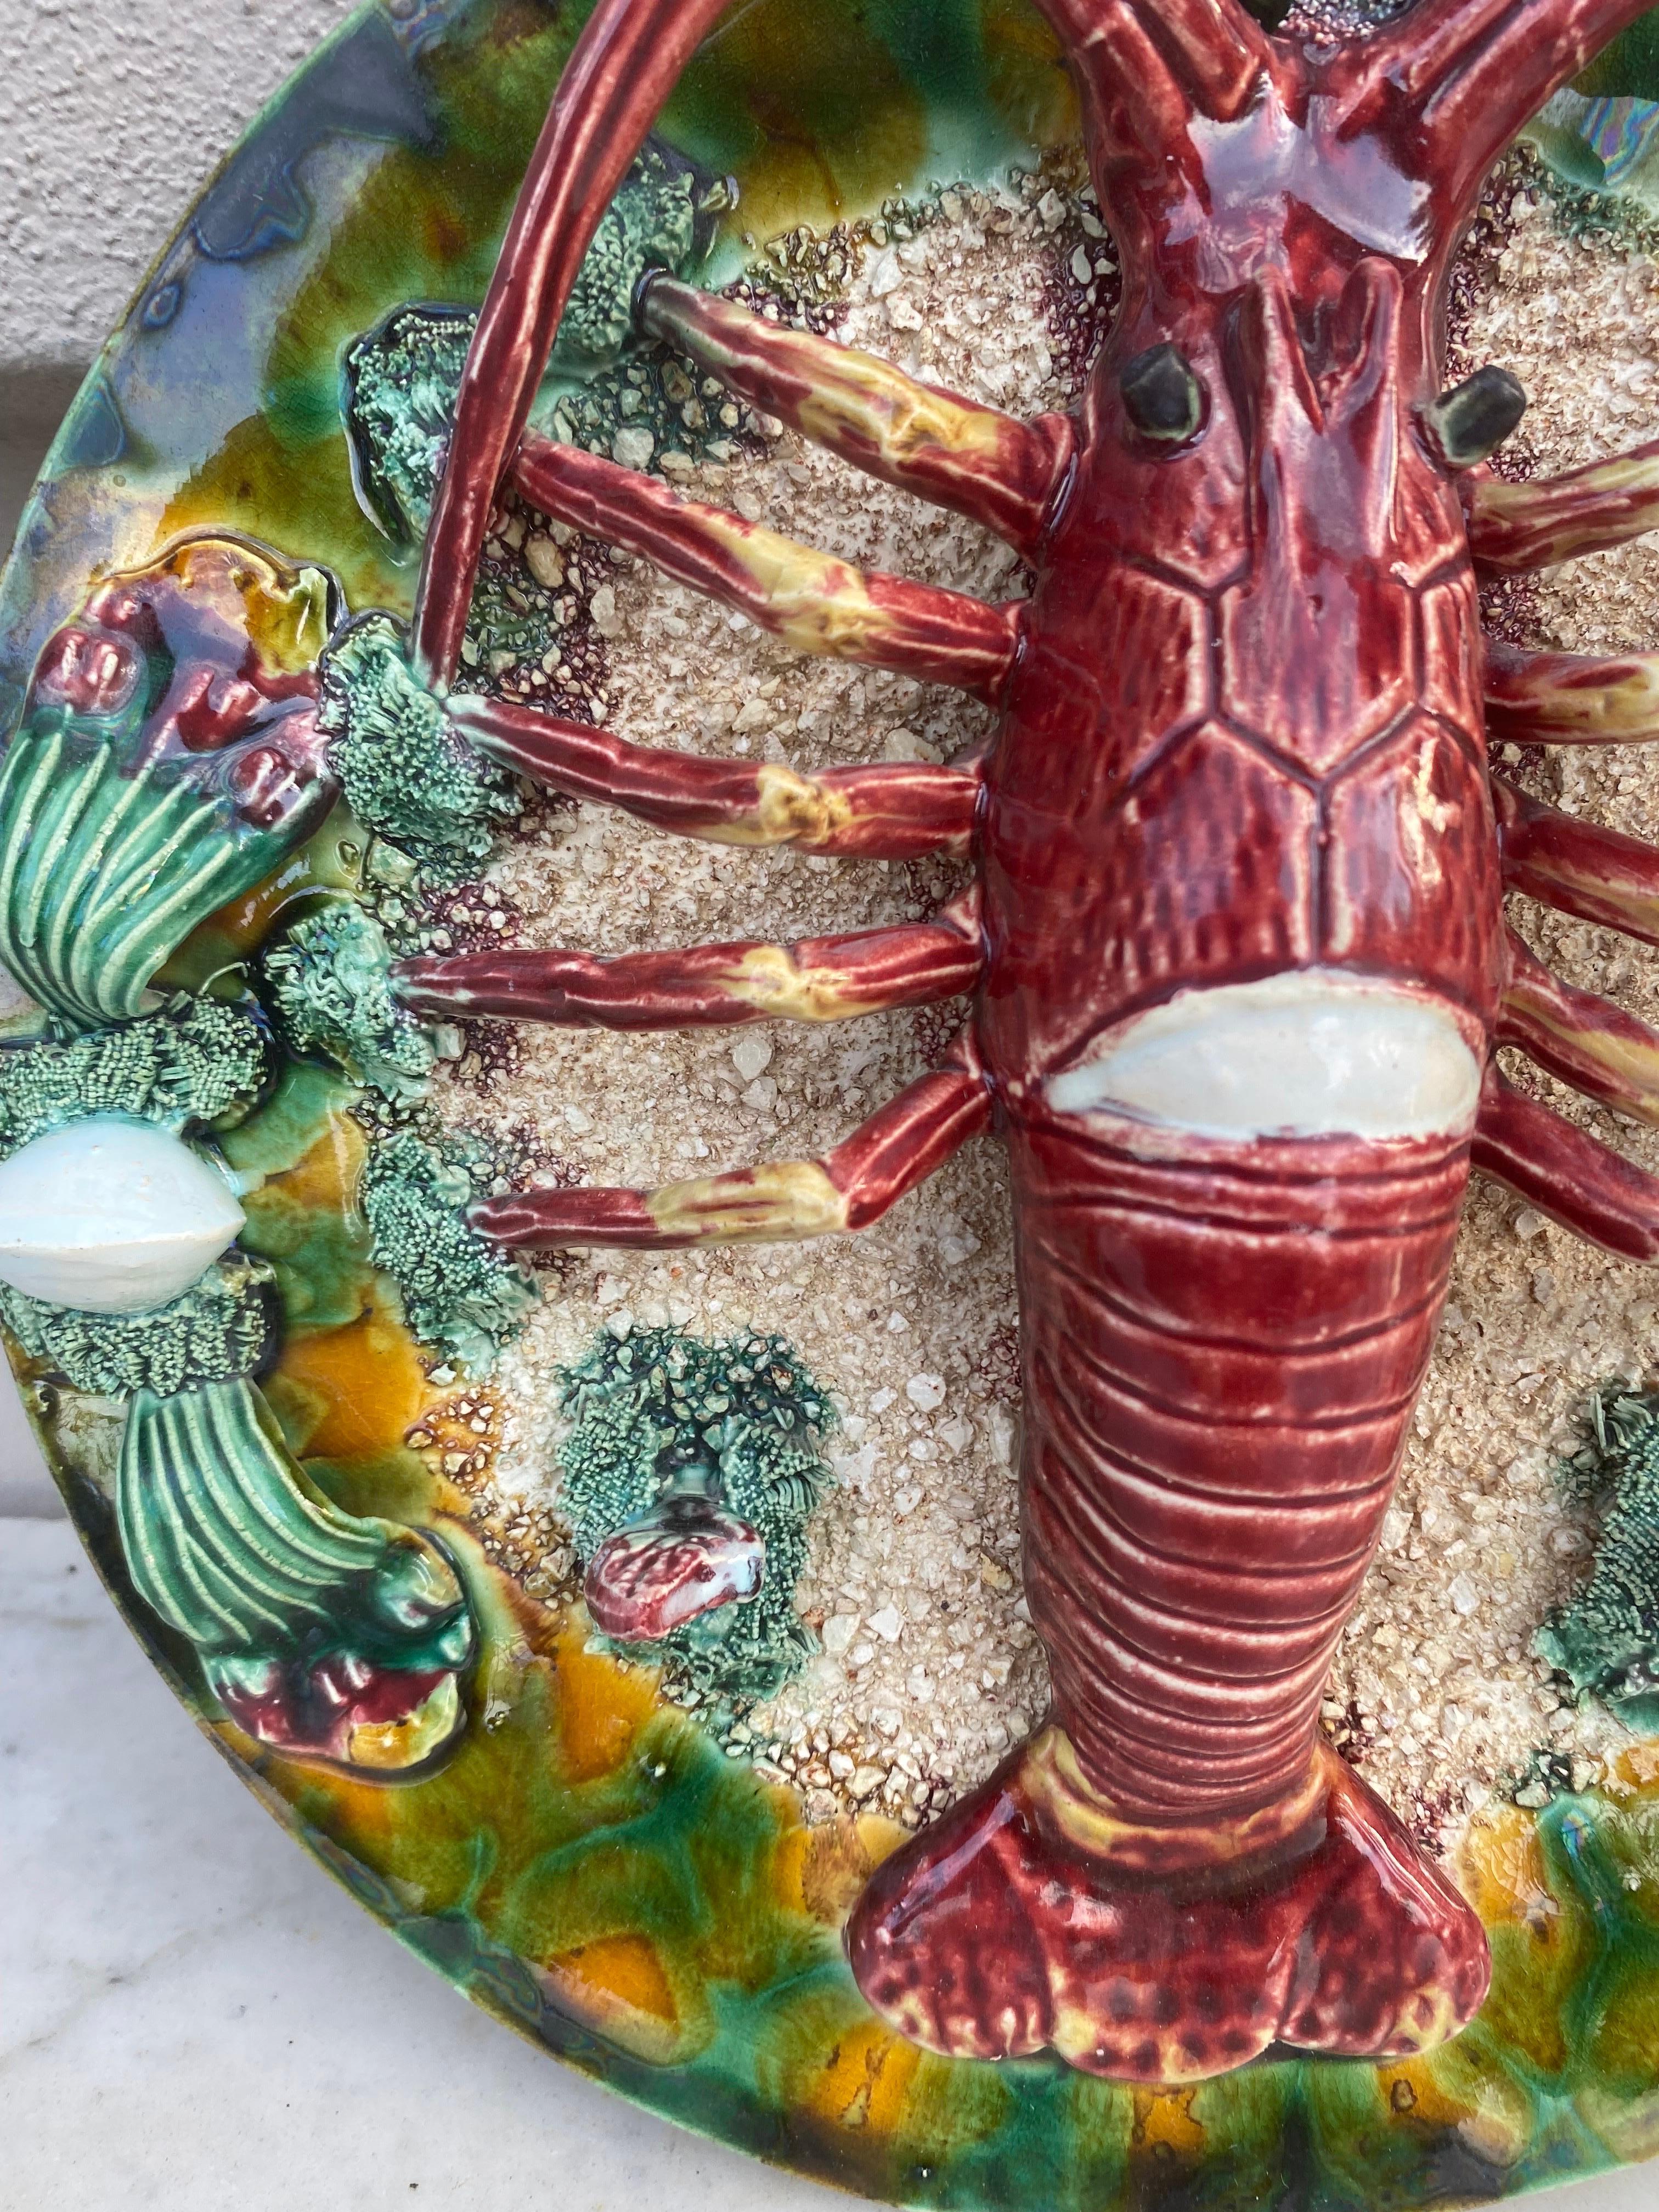 Large Majolica Palissy Portuguese lobster platter, circa 1940.
Decorated with mussels and shells,
Signed Caldas da Rainha.
12.5 inches Diameter.